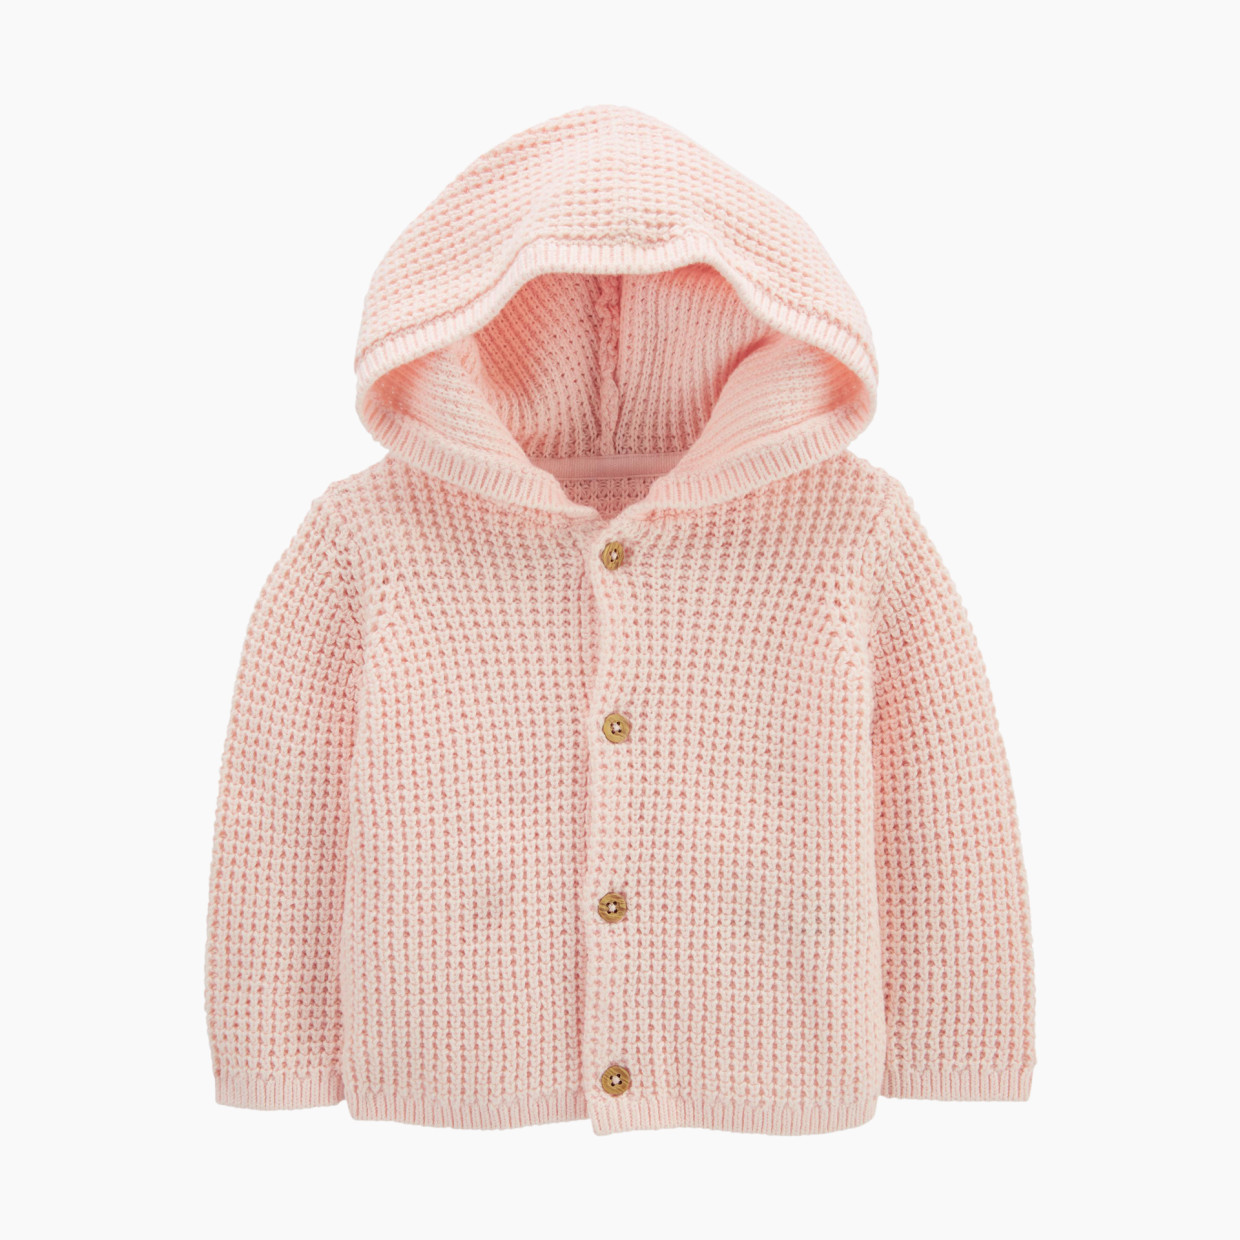 Carter's Hooded Cotton Cardigan - Pink, 3 M.